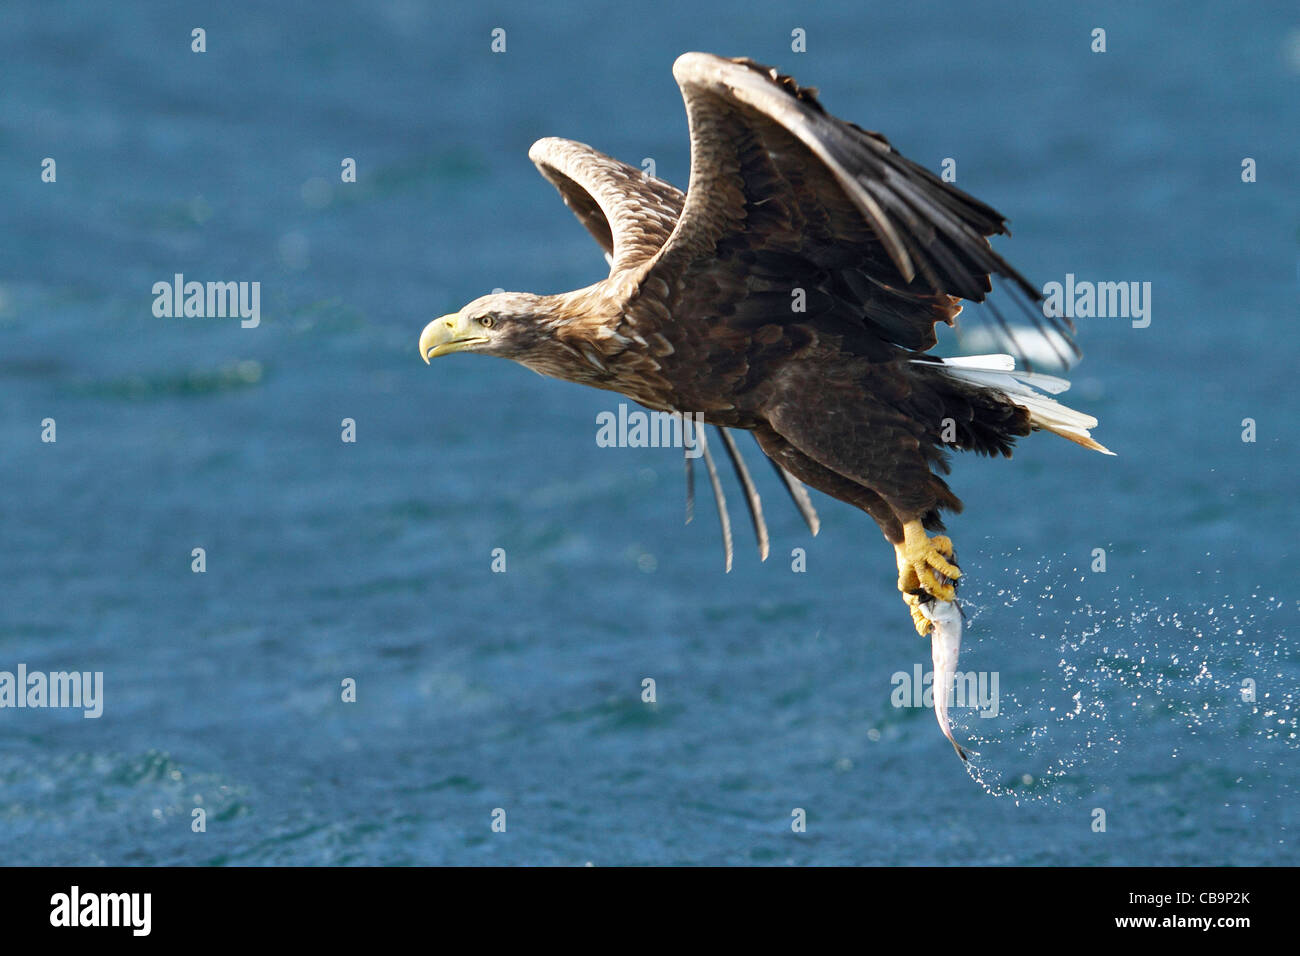 White Tailed Sea Eagle, Portree, Skye catching fish from sea, photographed from boat Stock Photo